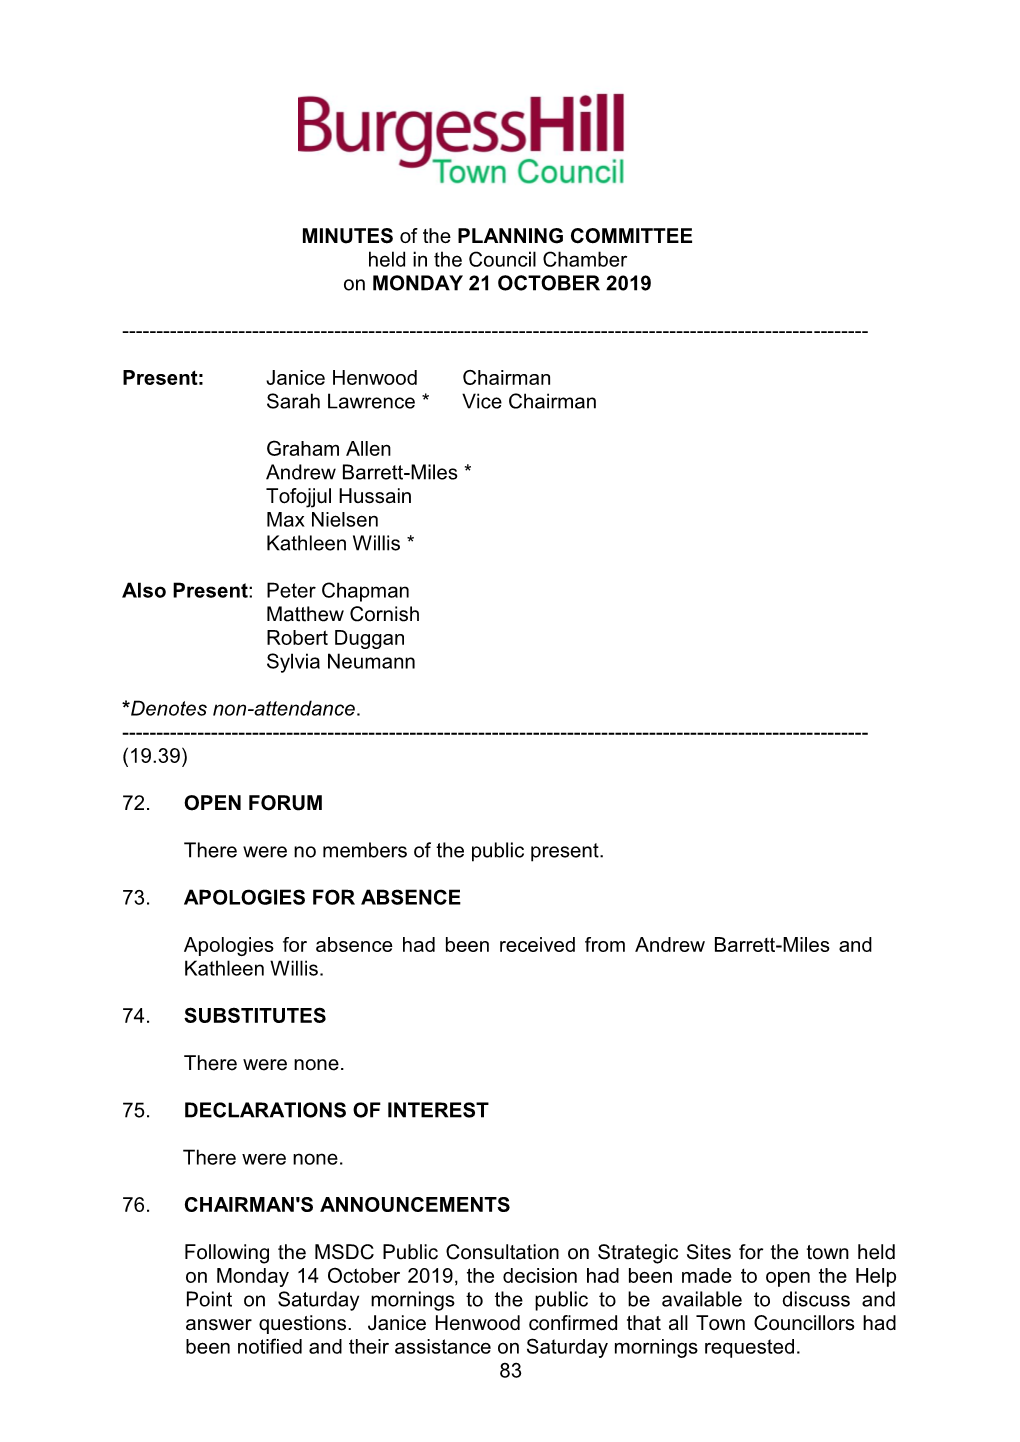 MINUTES of the PLANNING COMMITTEE Held in the Council Chamber on MONDAY 21 OCTOBER 2019